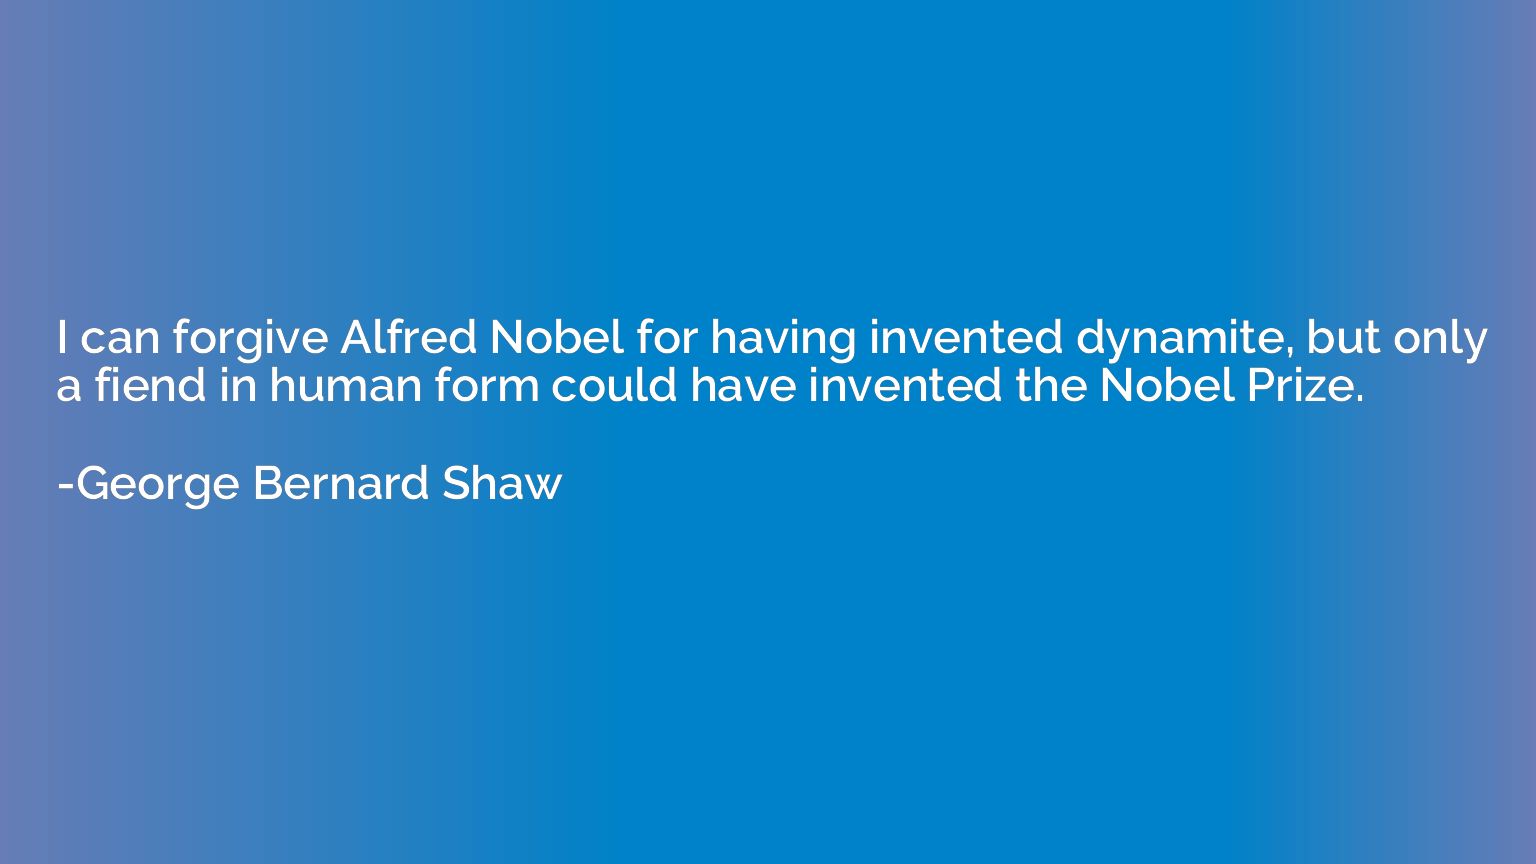 I can forgive Alfred Nobel for having invented dynamite, but